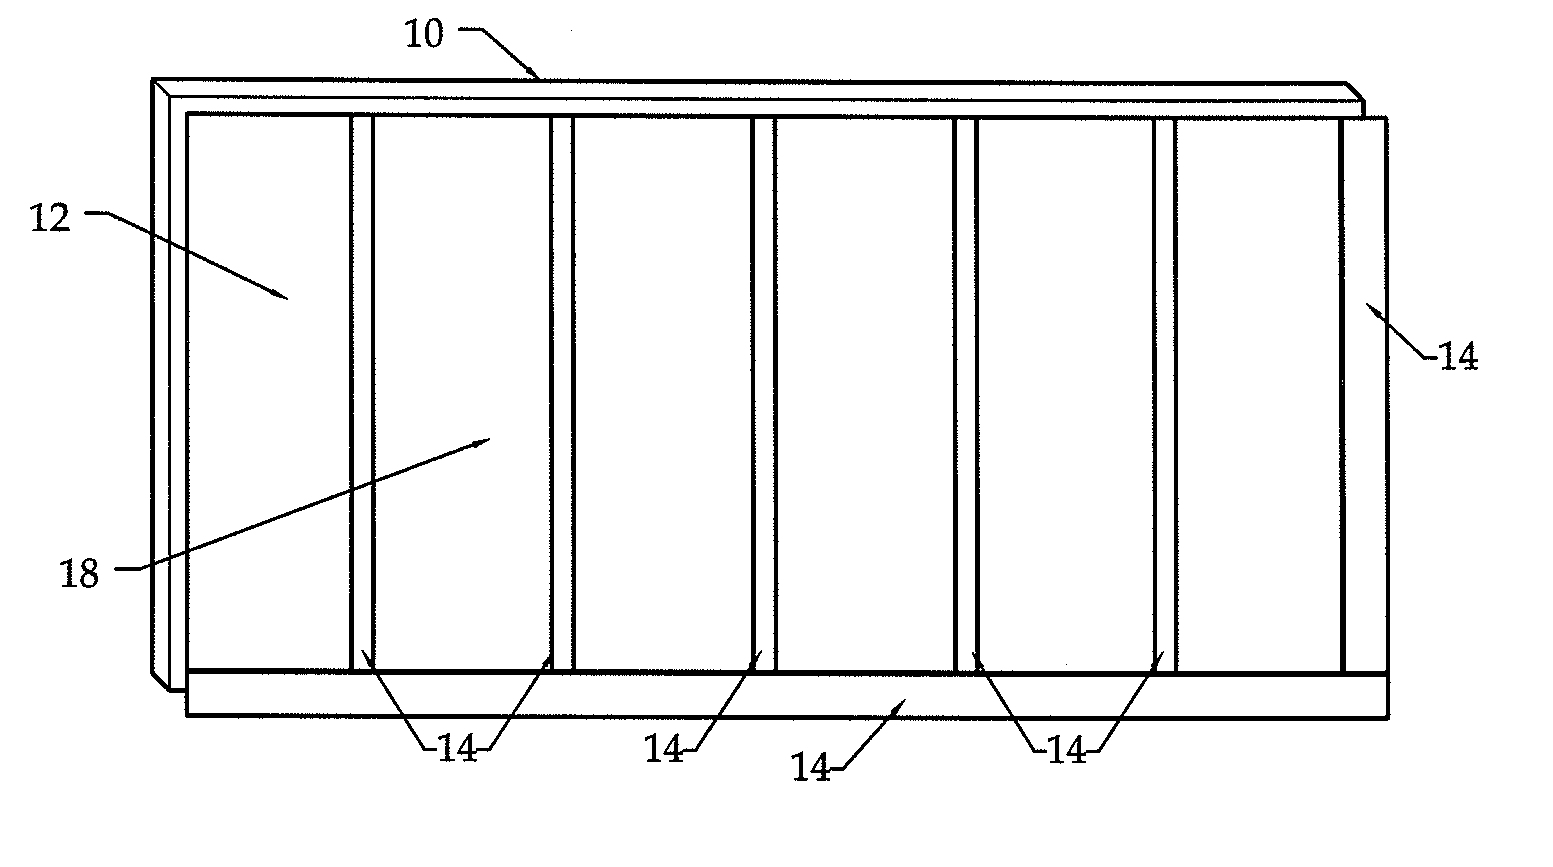 Building Insulation Sheathing Systems and Methods of Use Thereof